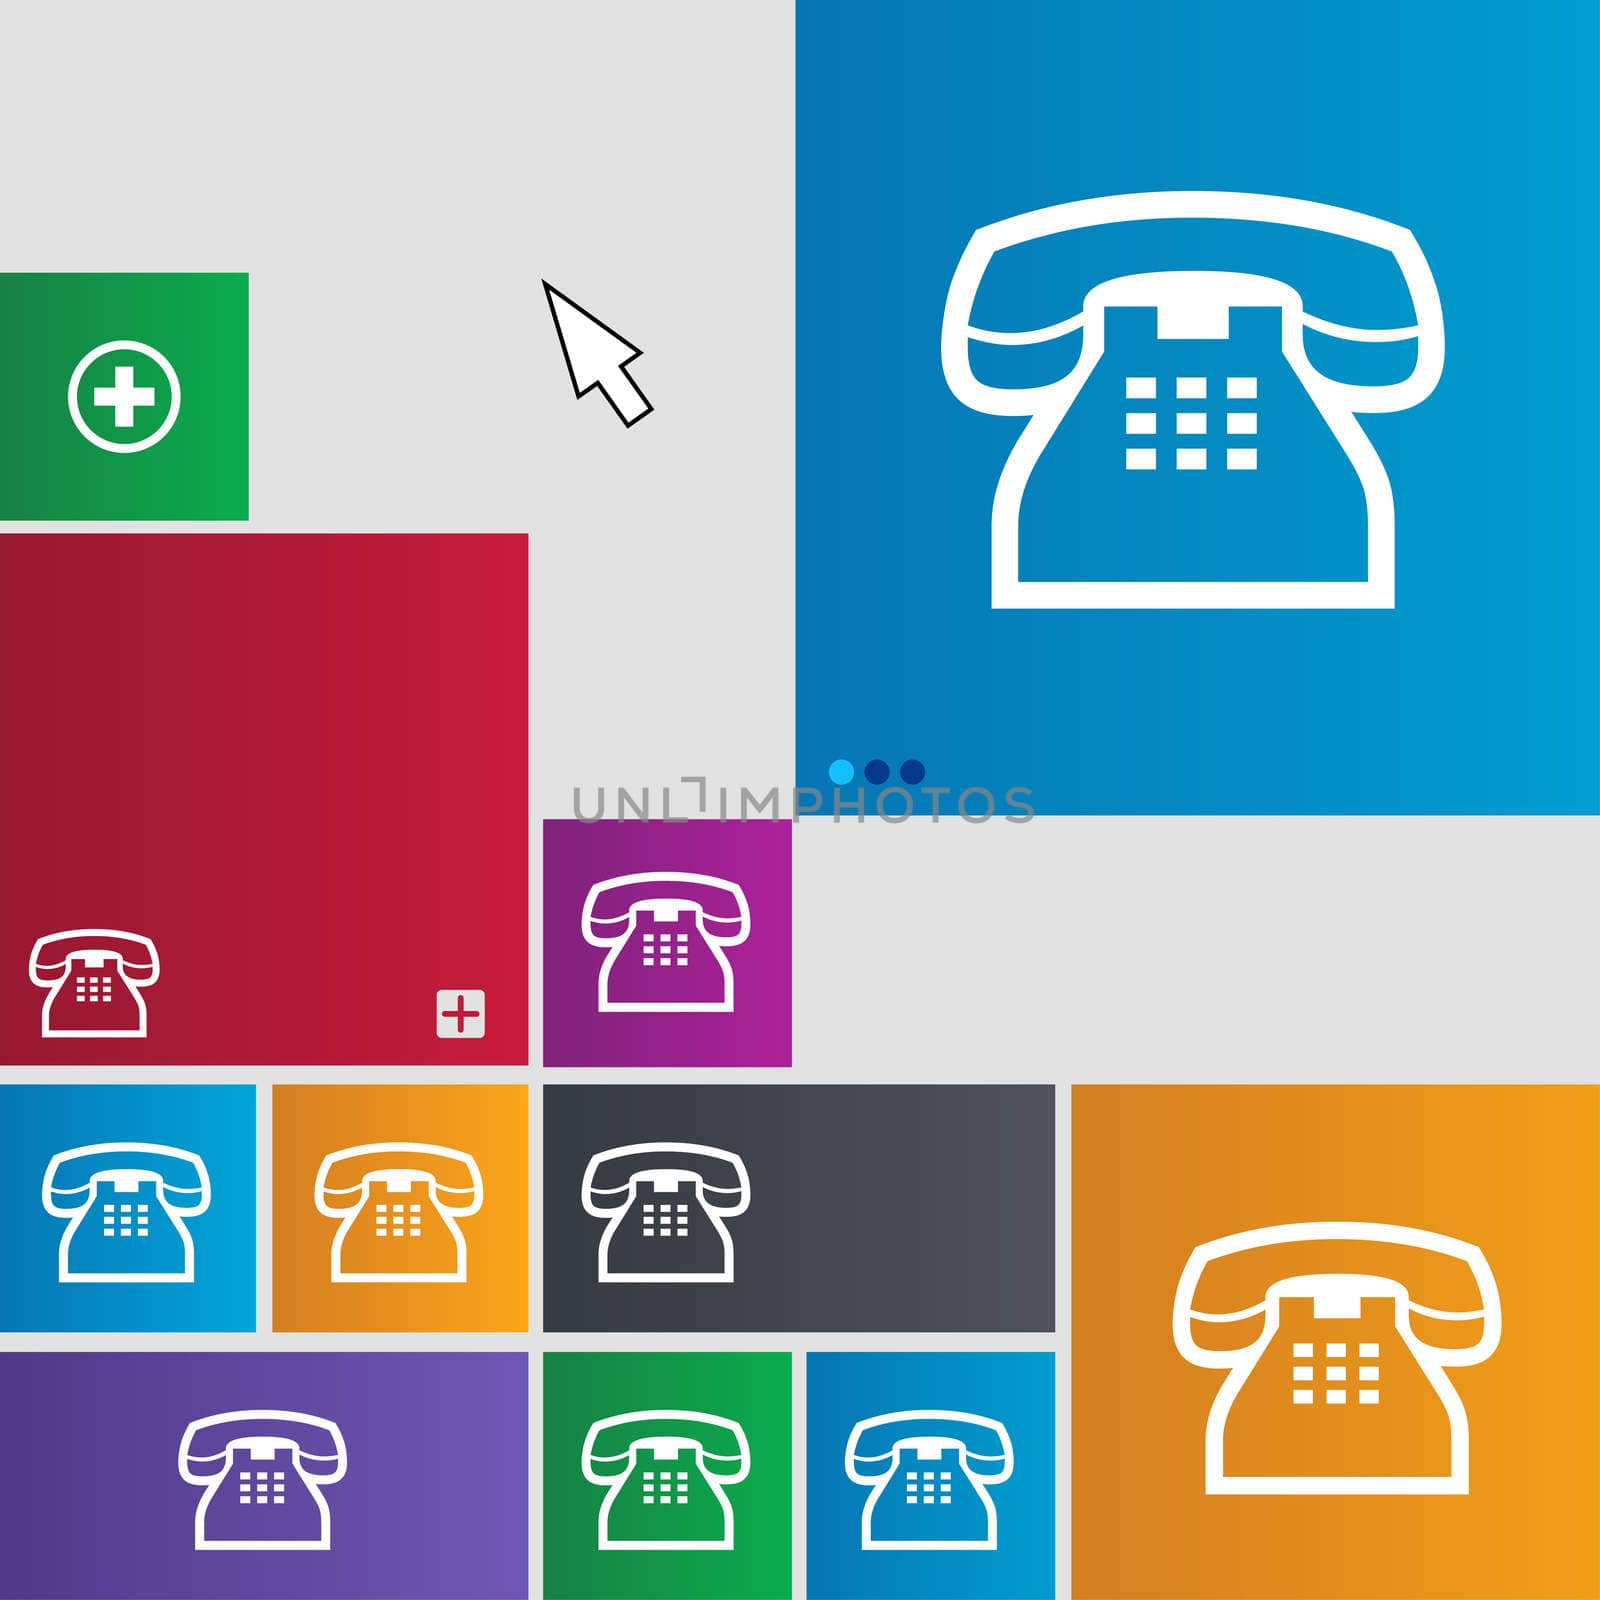 retro telephone handset icon sign. buttons. Modern interface website buttons with cursor pointer. illustration